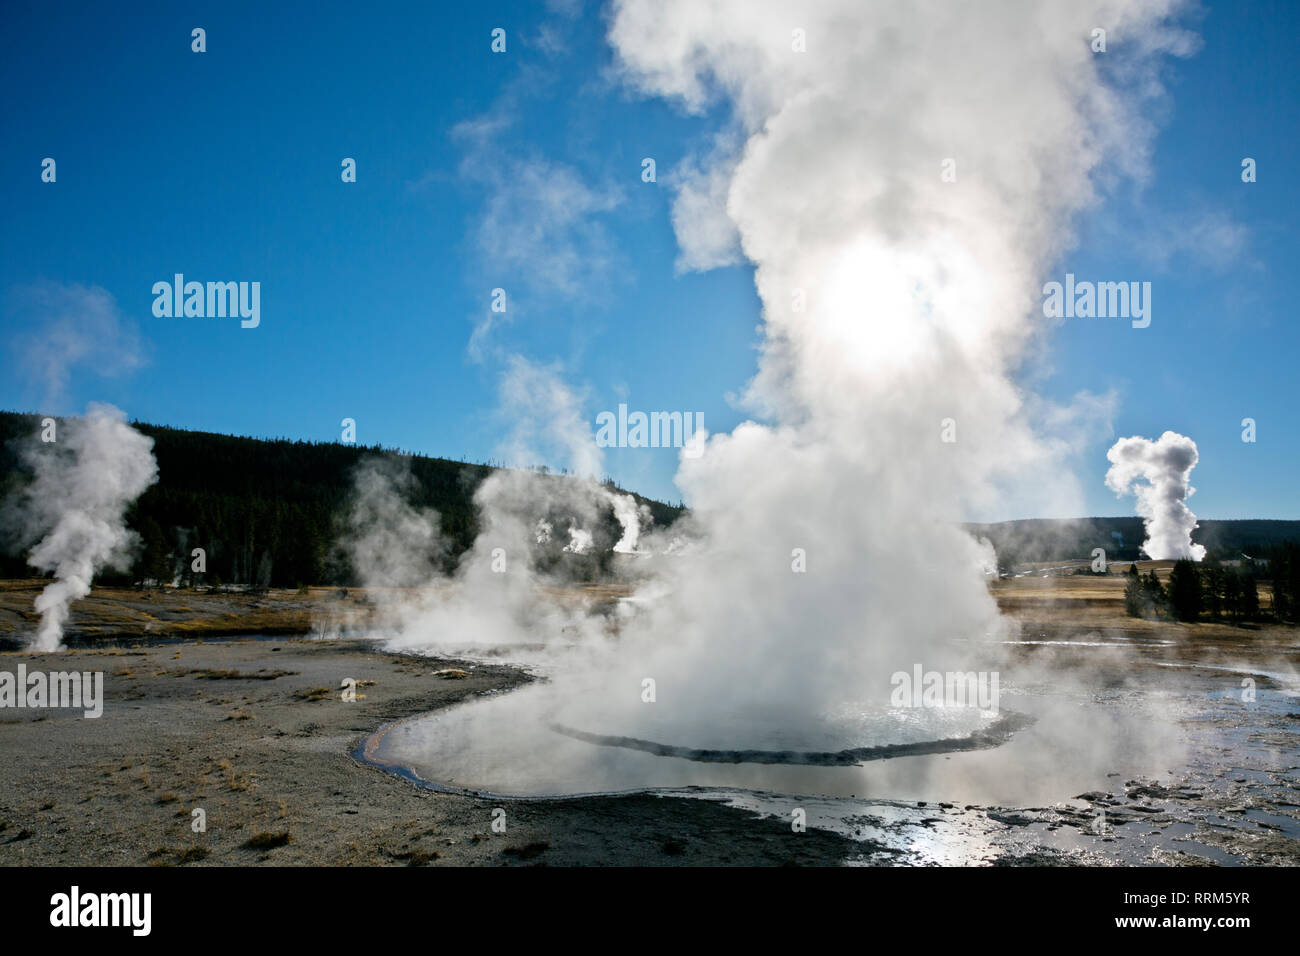 WY03850-00...WYOMING - Erupting geysers on the Upper Geyser Basin of Yellowstone National Park. Stock Photo